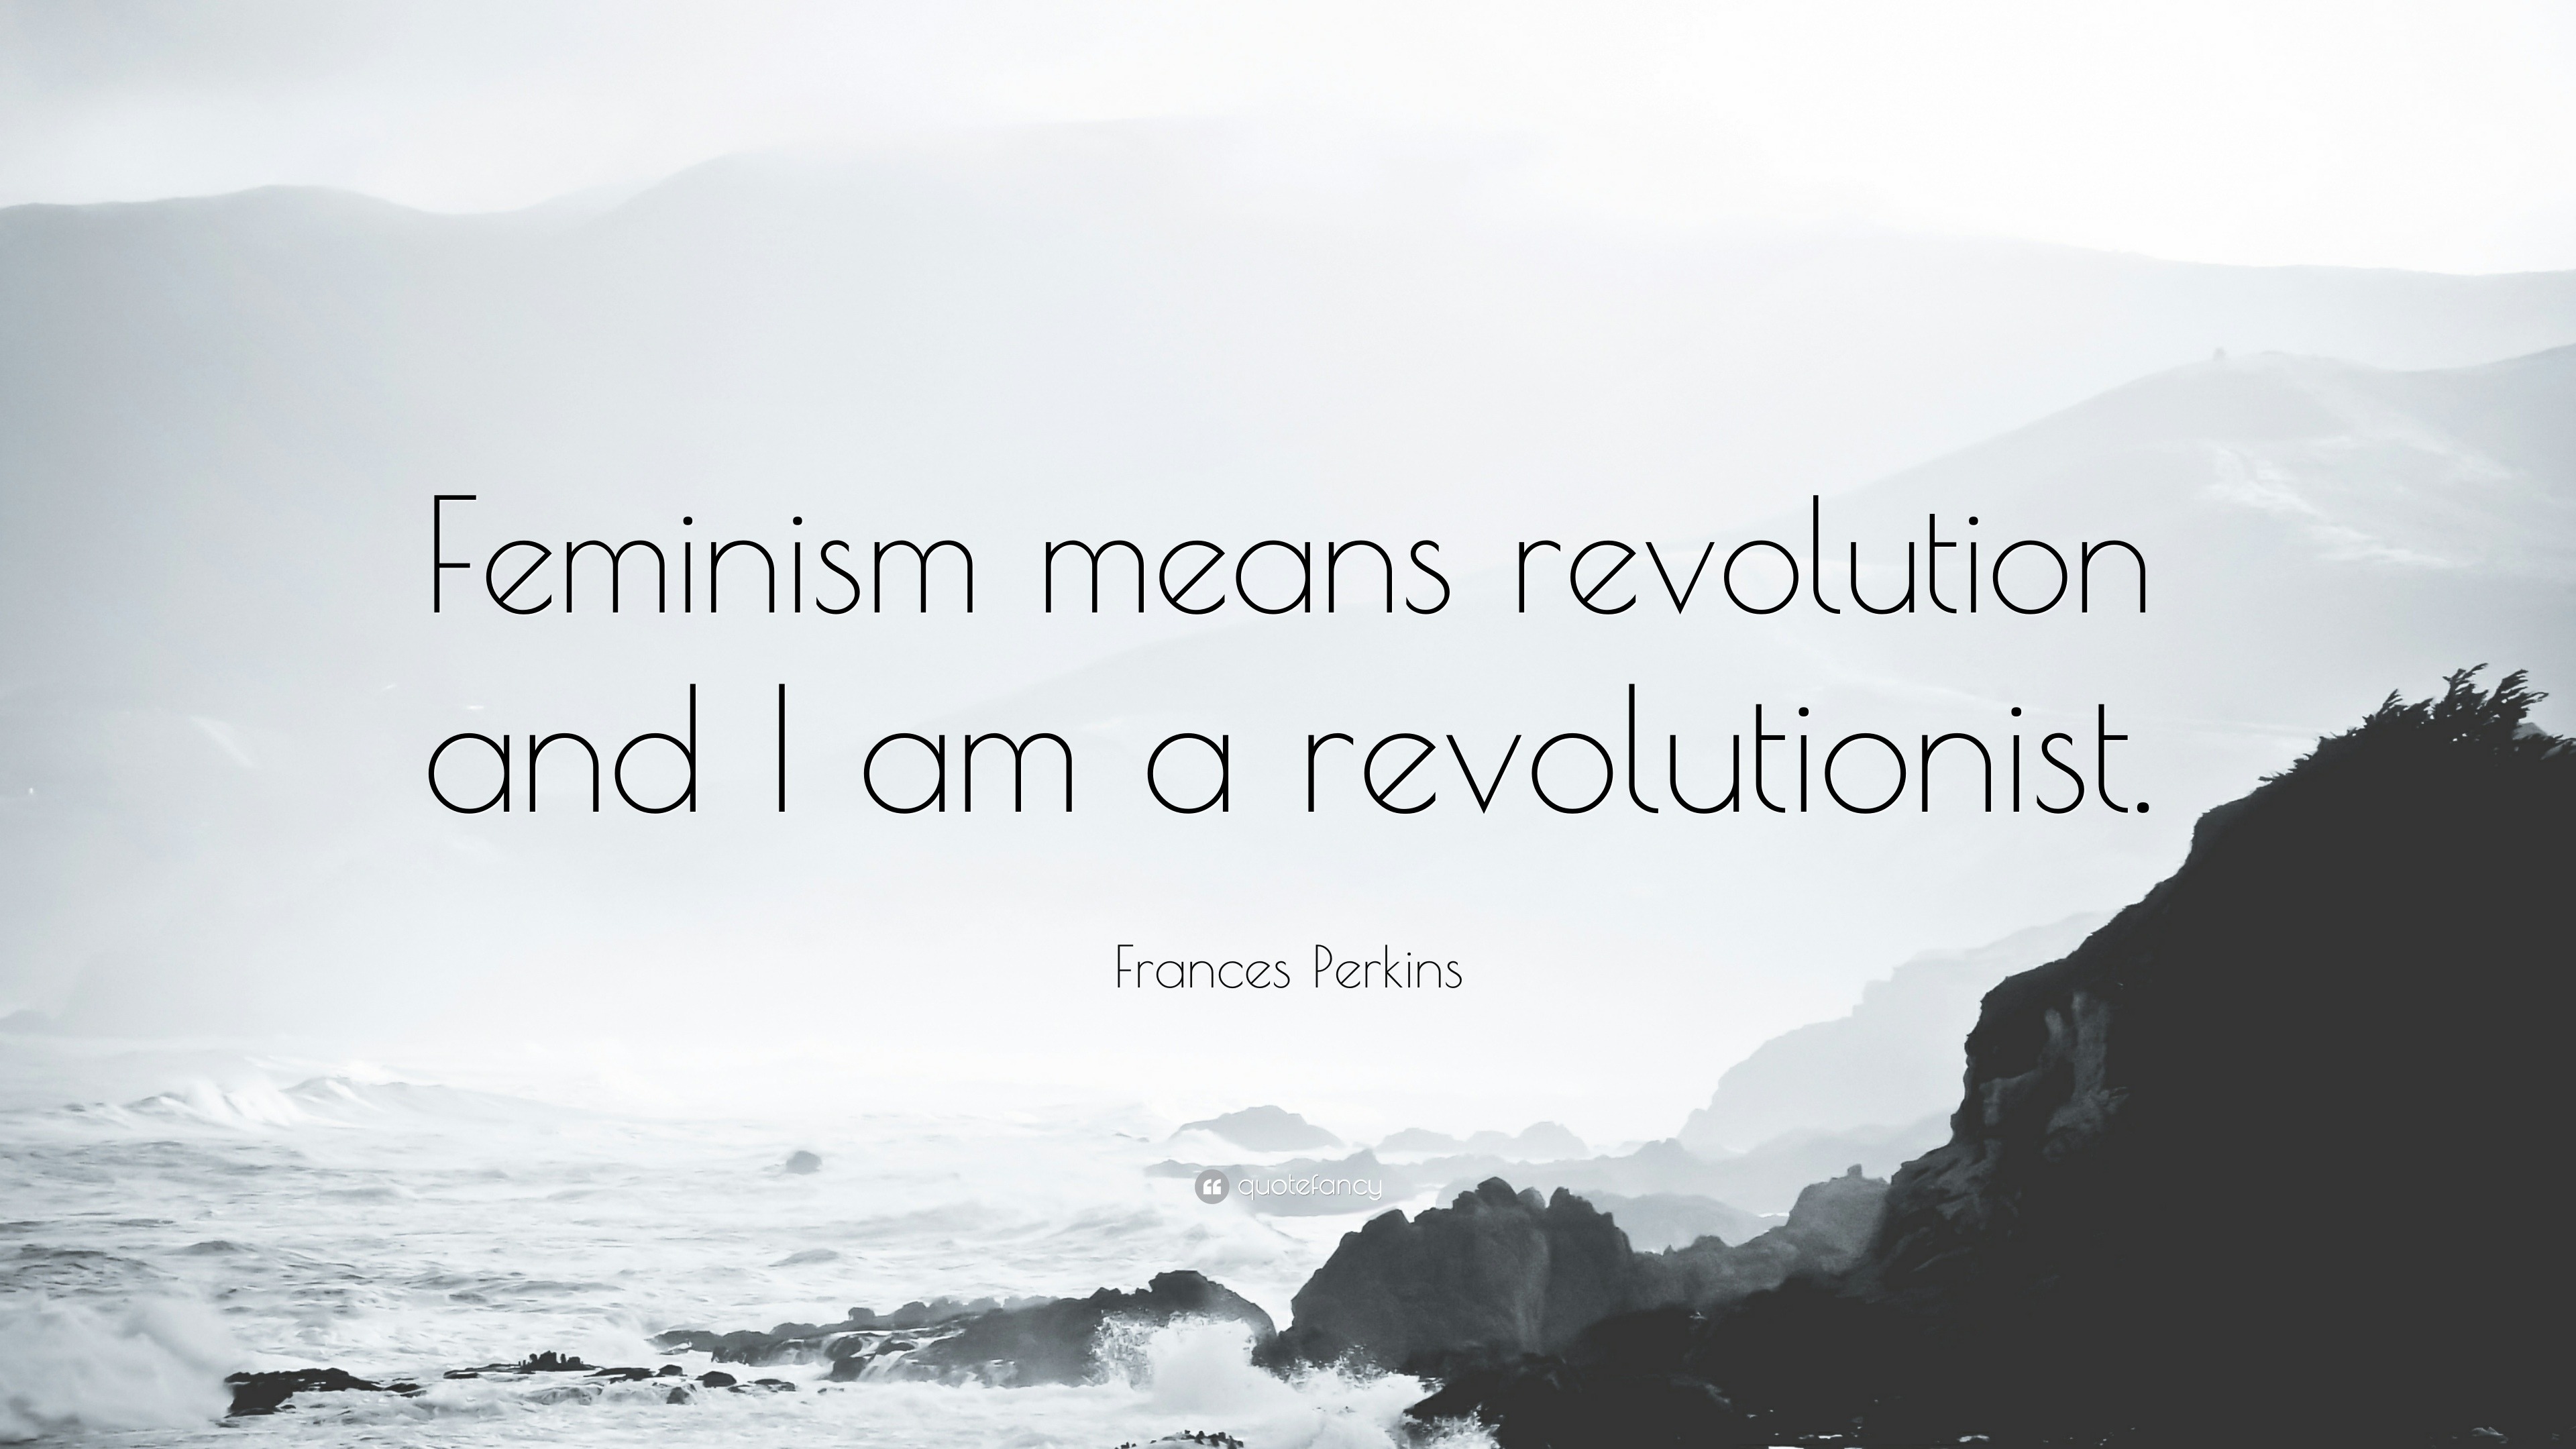 Frances Perkins Quote Feminism Means Revolution And I Am A Revolutionist 9 Wallpapers Quotefancy